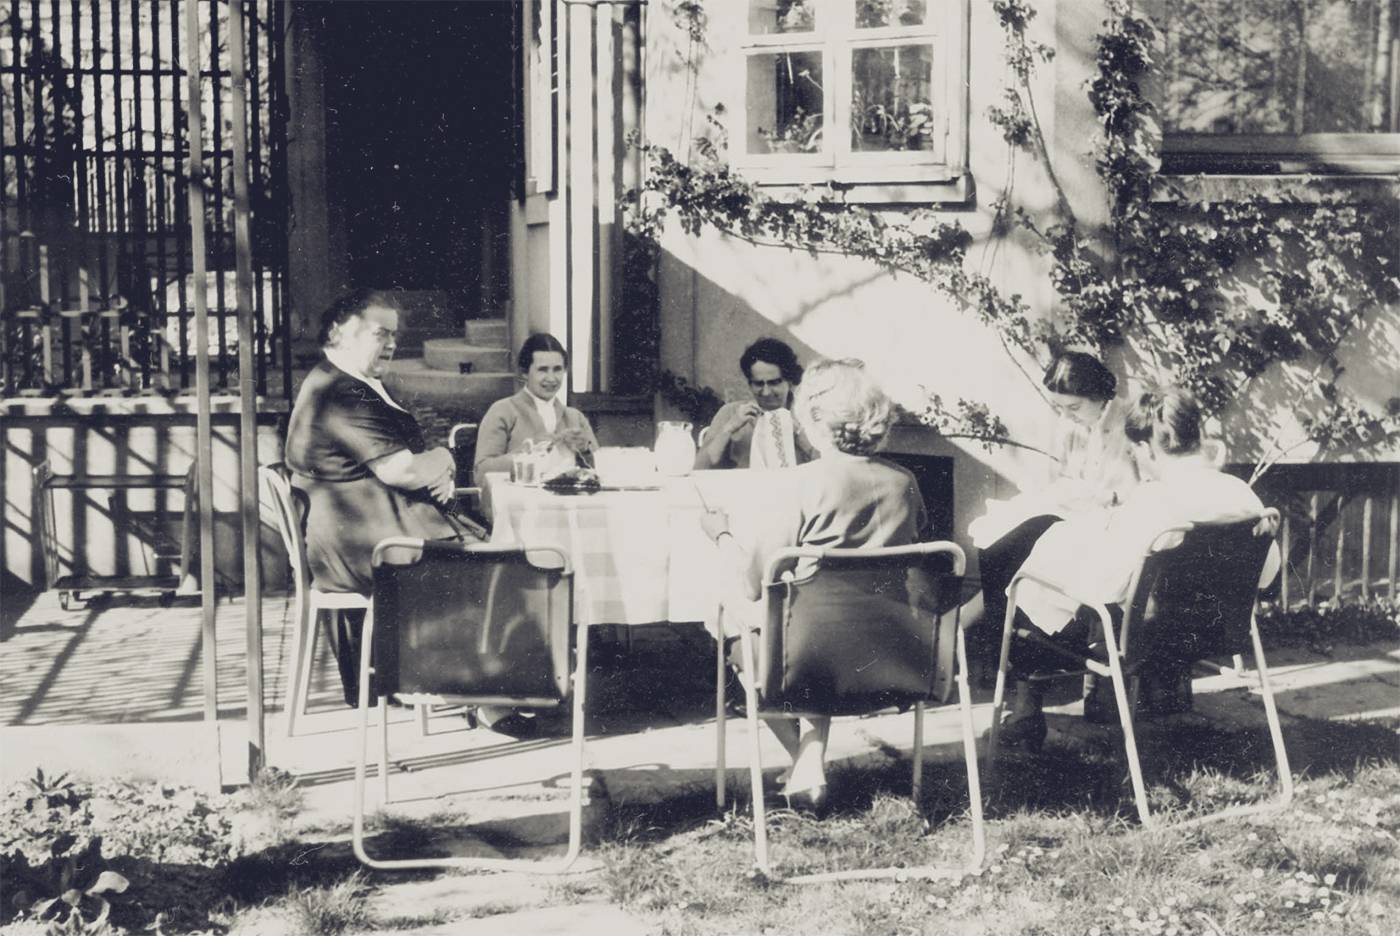 Adrienne von Speyr in Basle with a group of women from the Community of Saint John (1950’s)